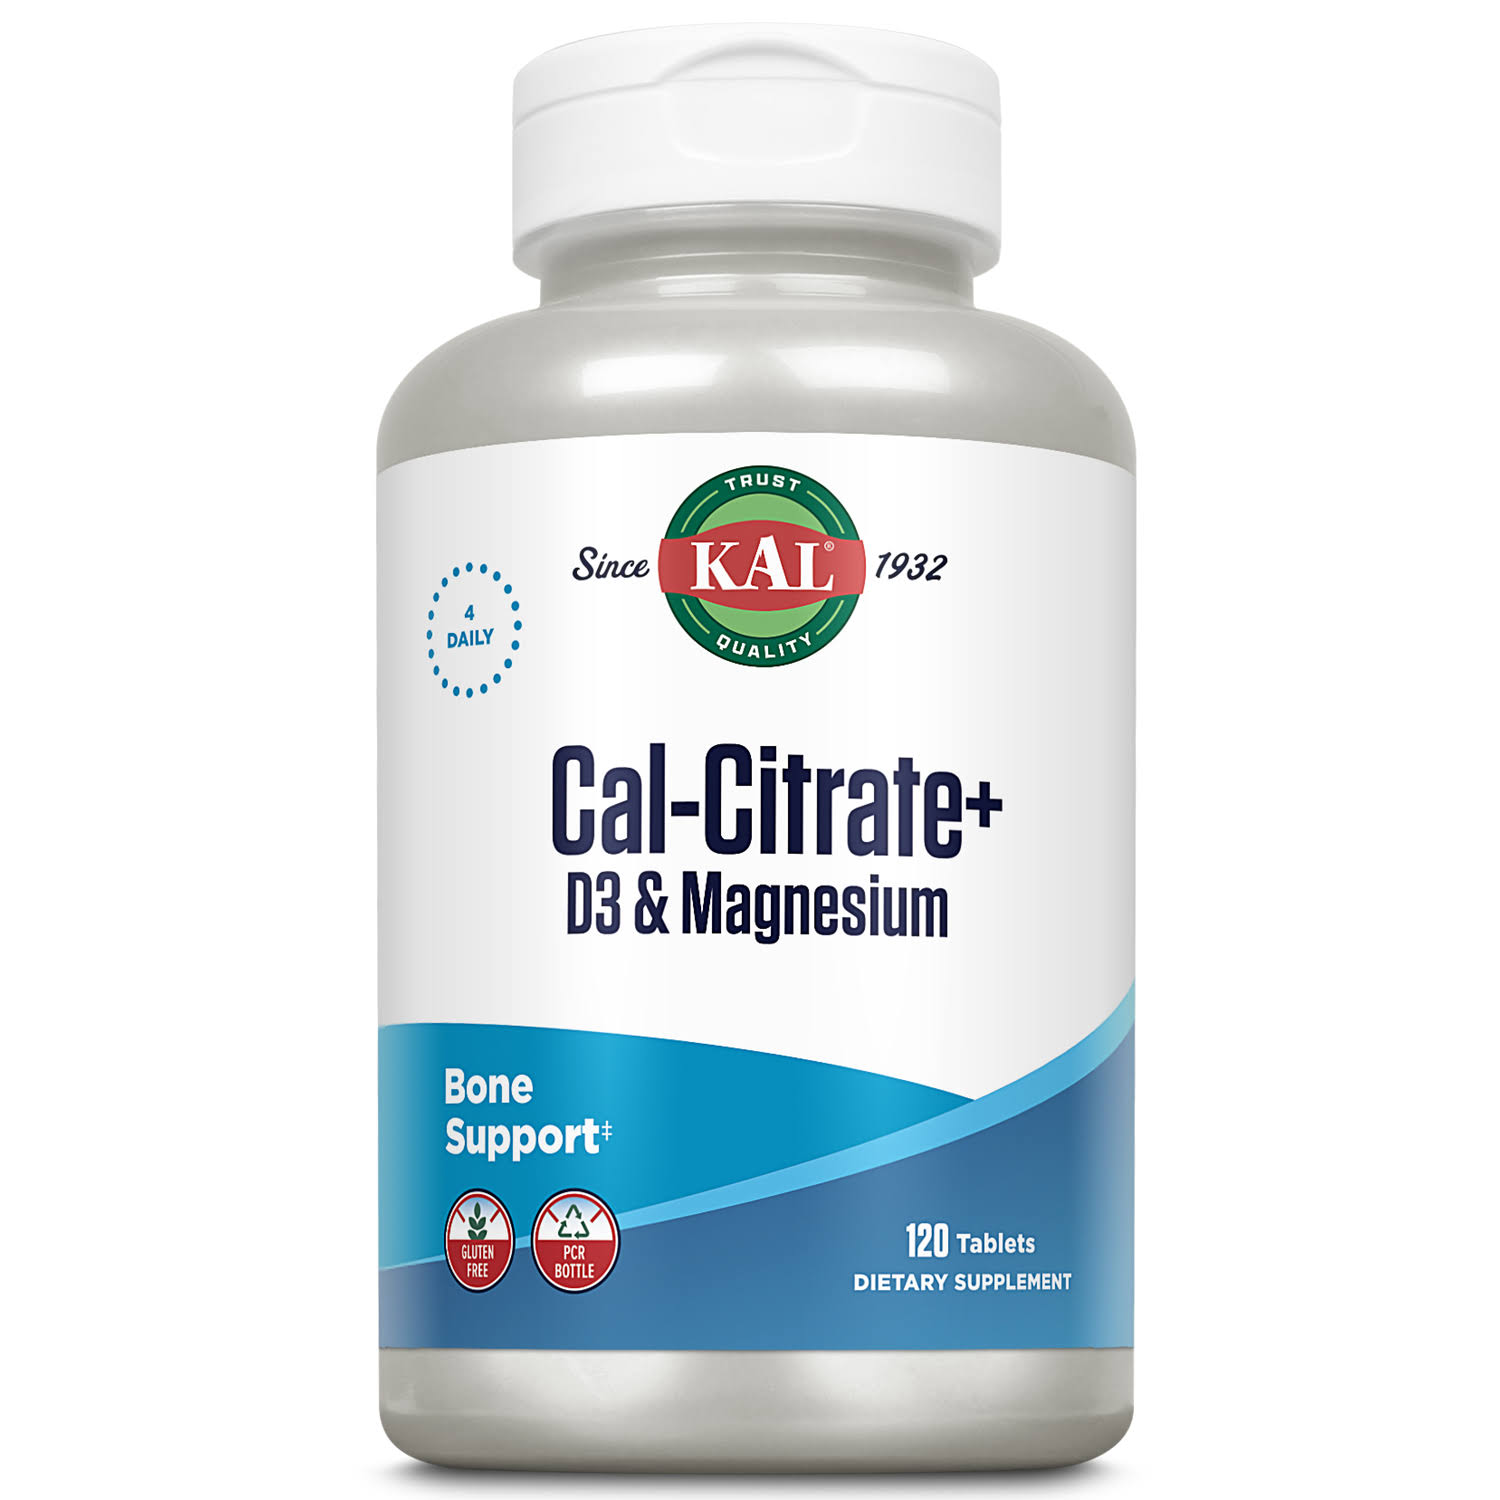 Kal Calcium Citrate+ - 1000 mg - 120 Tablets